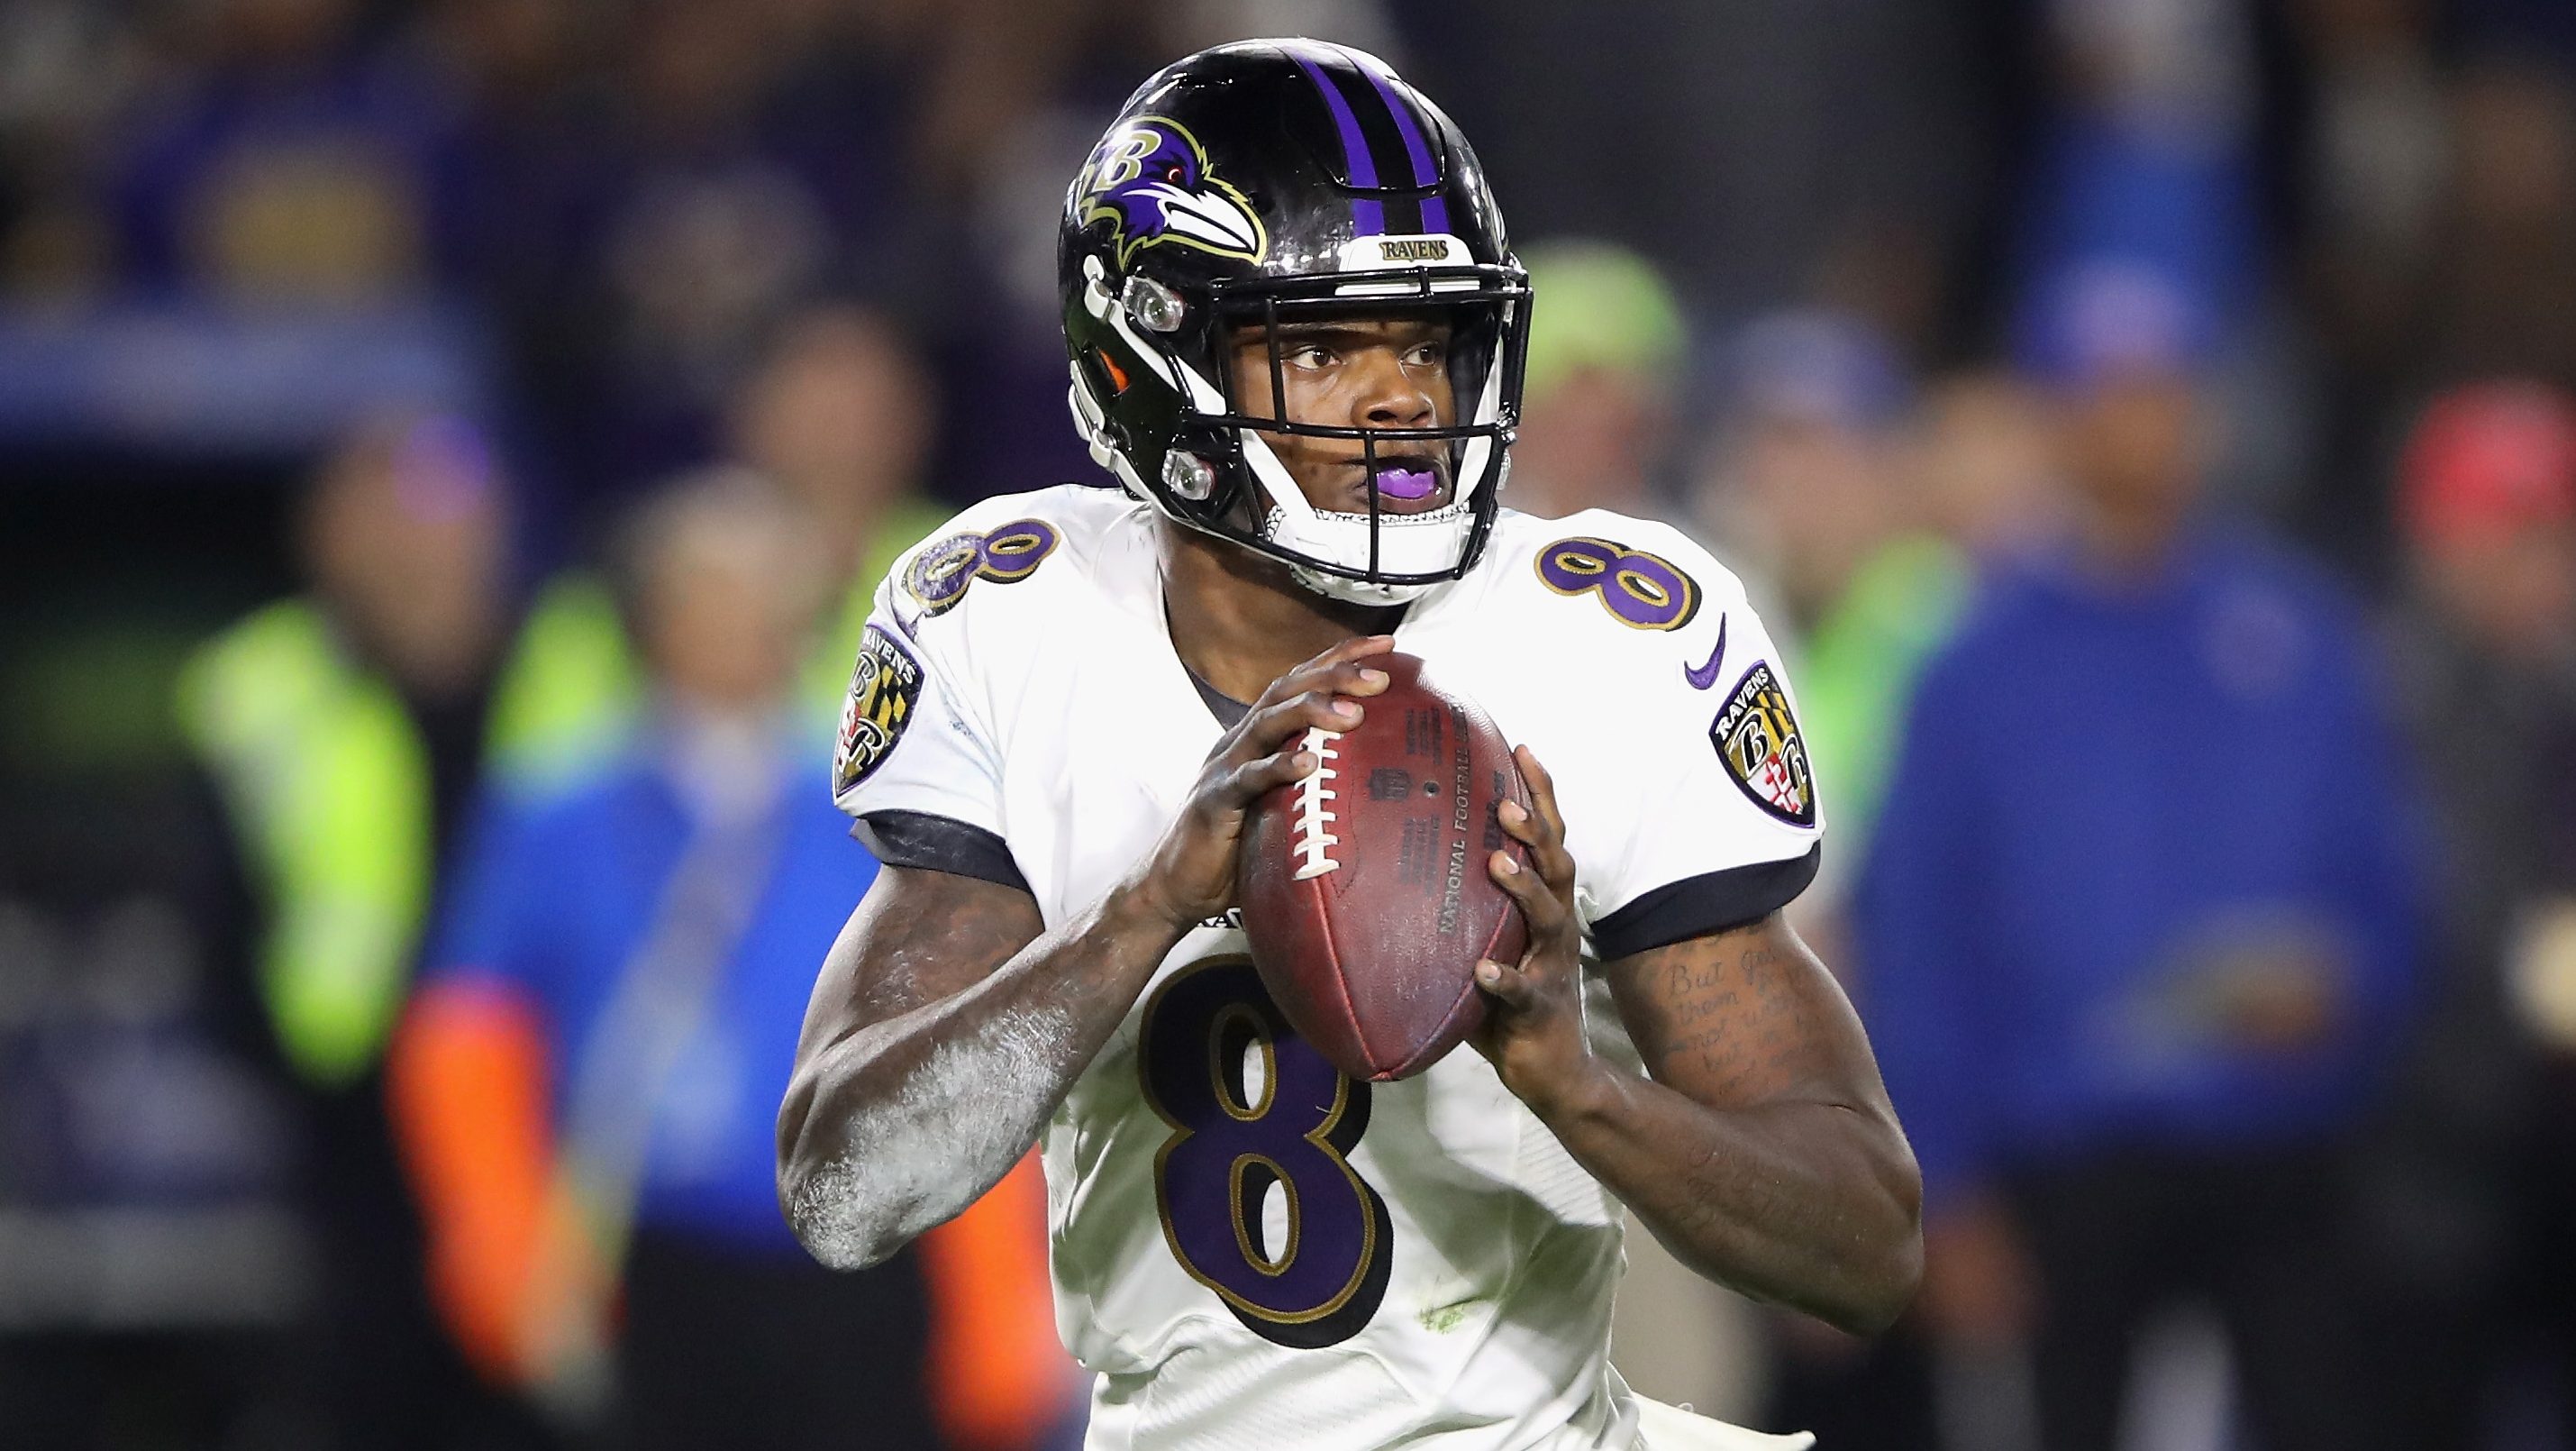 Ravens Playoff Picture Can They Make It With Win & Loss?